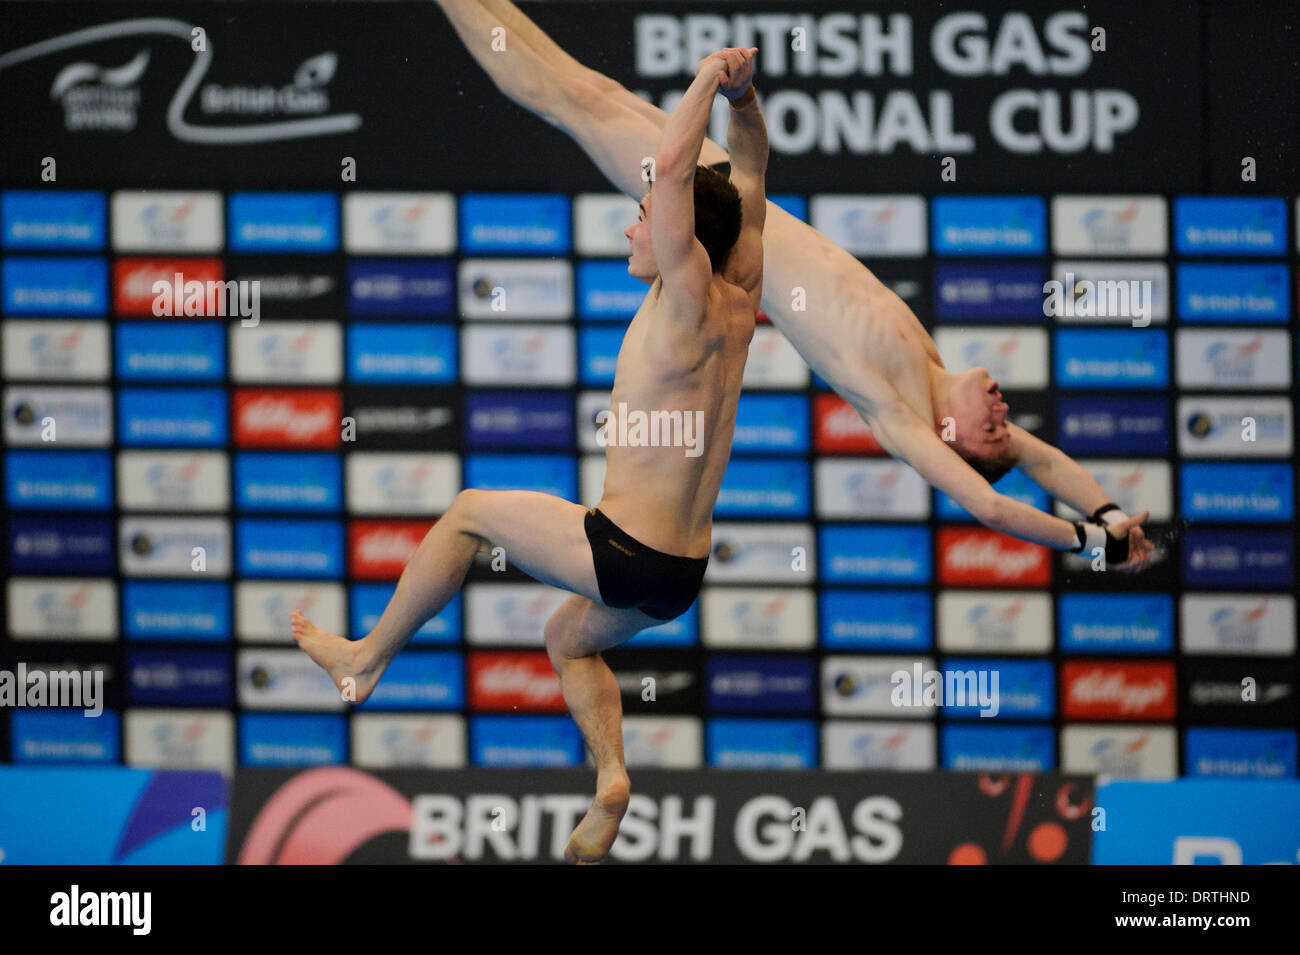 Southend-on-Sea, UK. 1st Feb, 2014. Daniel Goodfellow of Plymouth Diving gets out of shape in his dive before landing badly and injuring himself during a dive with Matty Lee of City of Leeds Diving Club in the Mens Synchronised 10m Platform Final on Day 2 of the British Gas Diving National Cup 2014 from Southend Swimming & Diving Centre. Credit:  Action Plus Sports Images/Alamy Live News Stock Photo